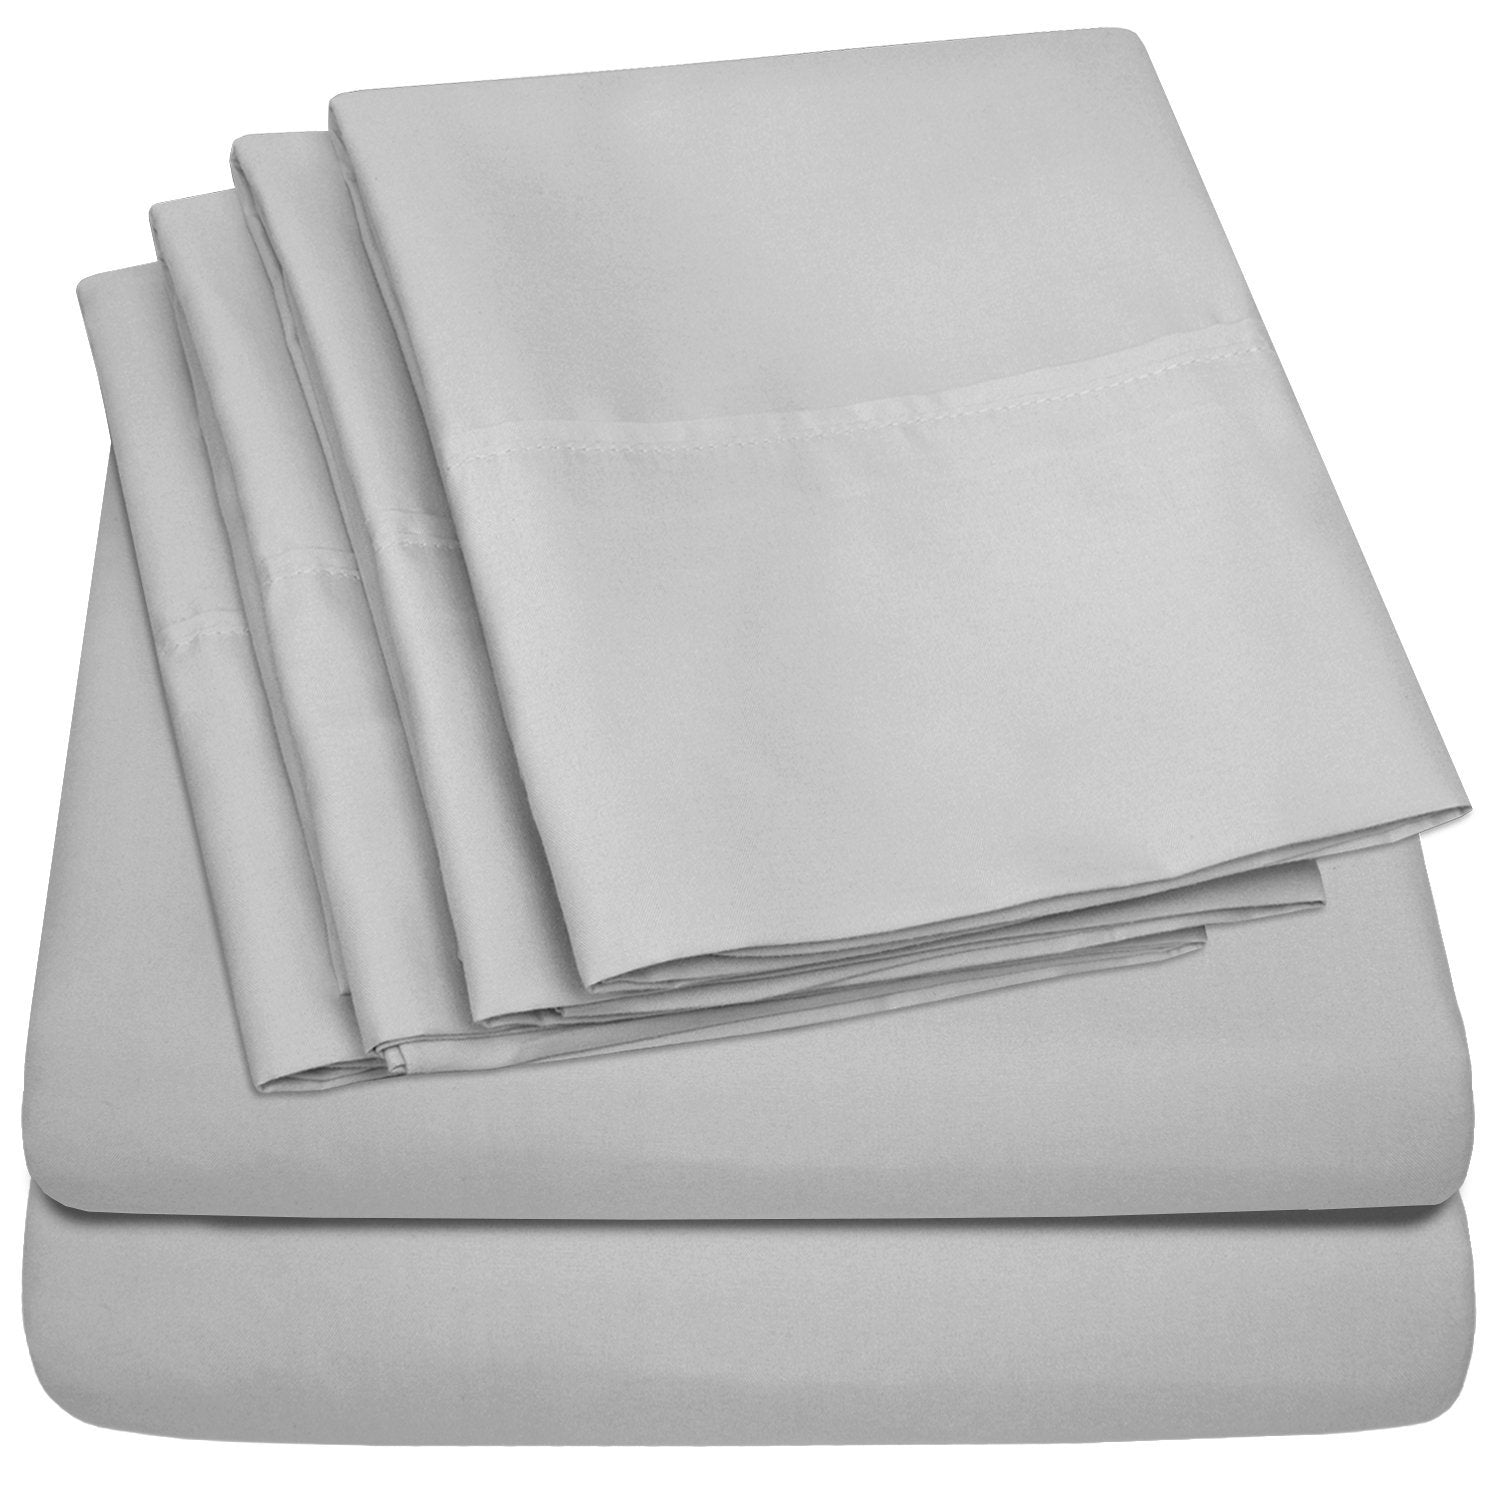 Deluxe 6-Piece Bed Sheet Set (Silver) - Folded